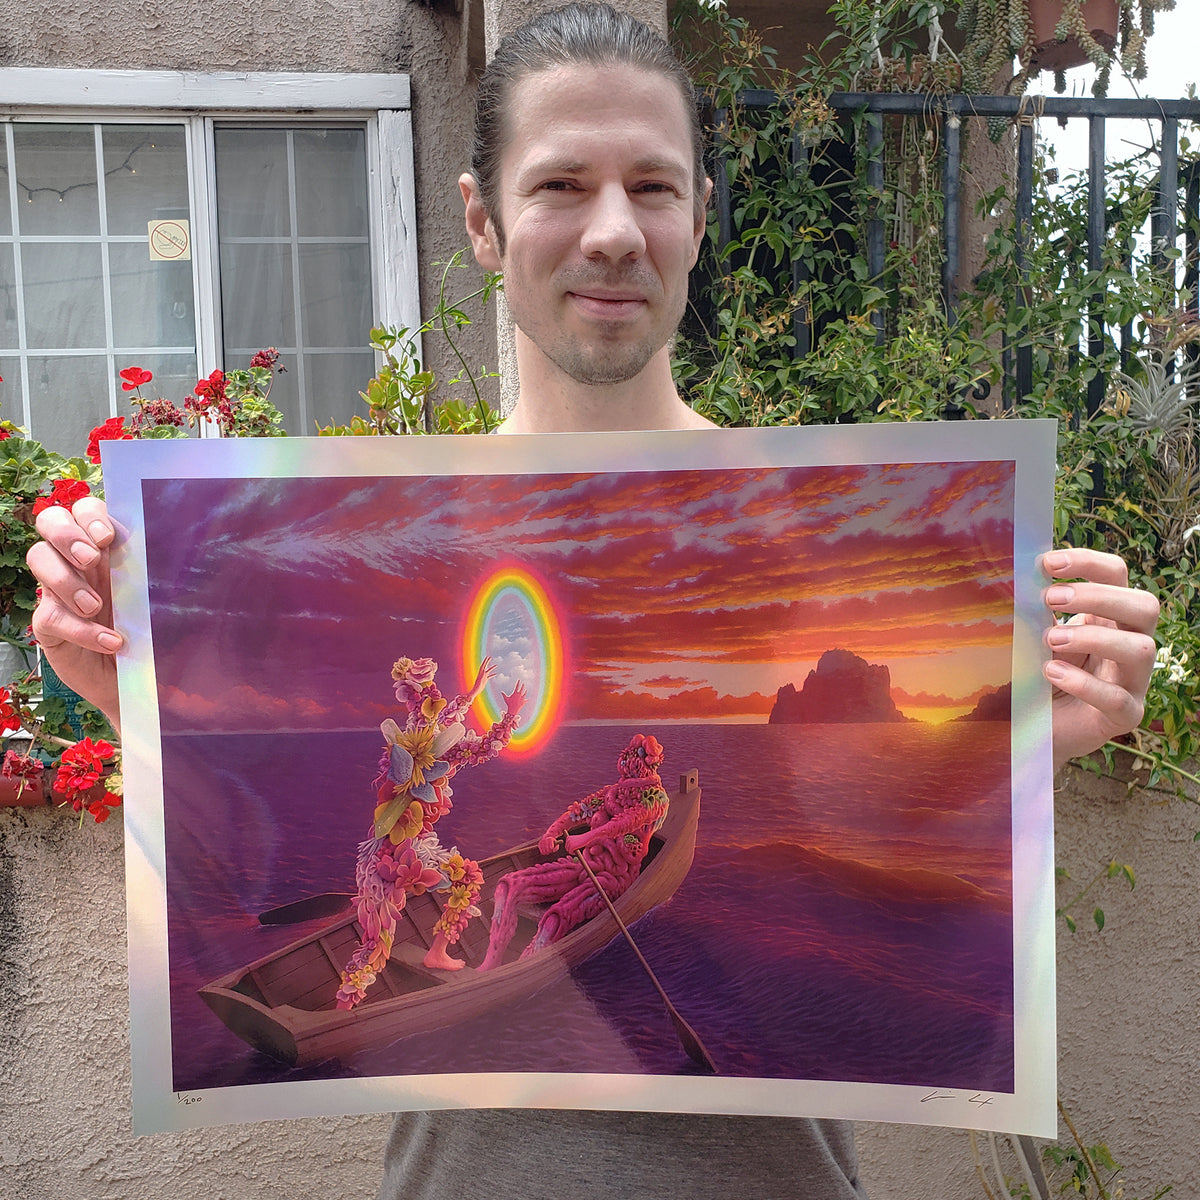 Adrian Cox &quot;Spirit Gardener Searching for New Horizons&quot; - Rainbow Foil Print, Limited Edition of 200 - 18 x 24&quot;